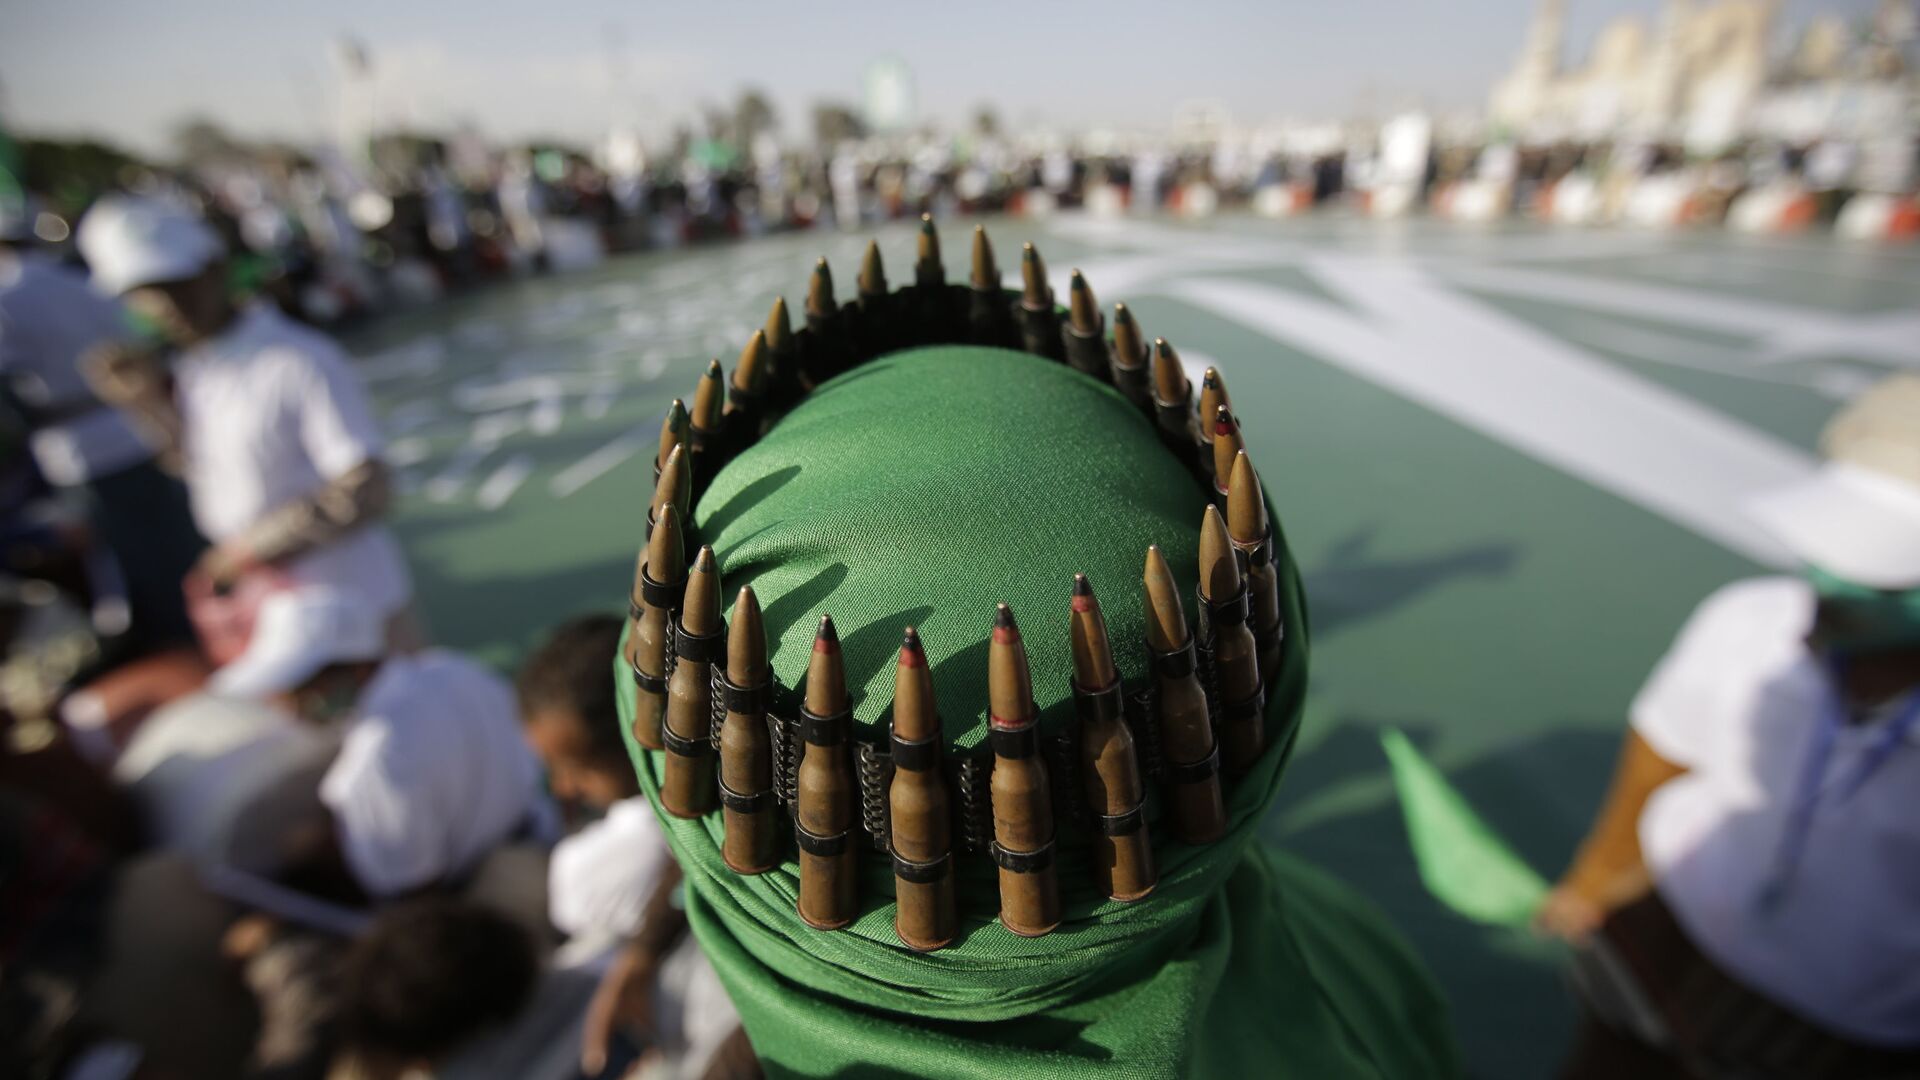 A supporter of Shiite rebels, known as Houthis, with an ammunition belt placed on his head attends a celebration of Moulid al-nabi, the birth of Islam's prophet Muhammad in Sanaa, Yemen, Saturday, Nov. 9, 2019 - Sputnik International, 1920, 09.06.2021